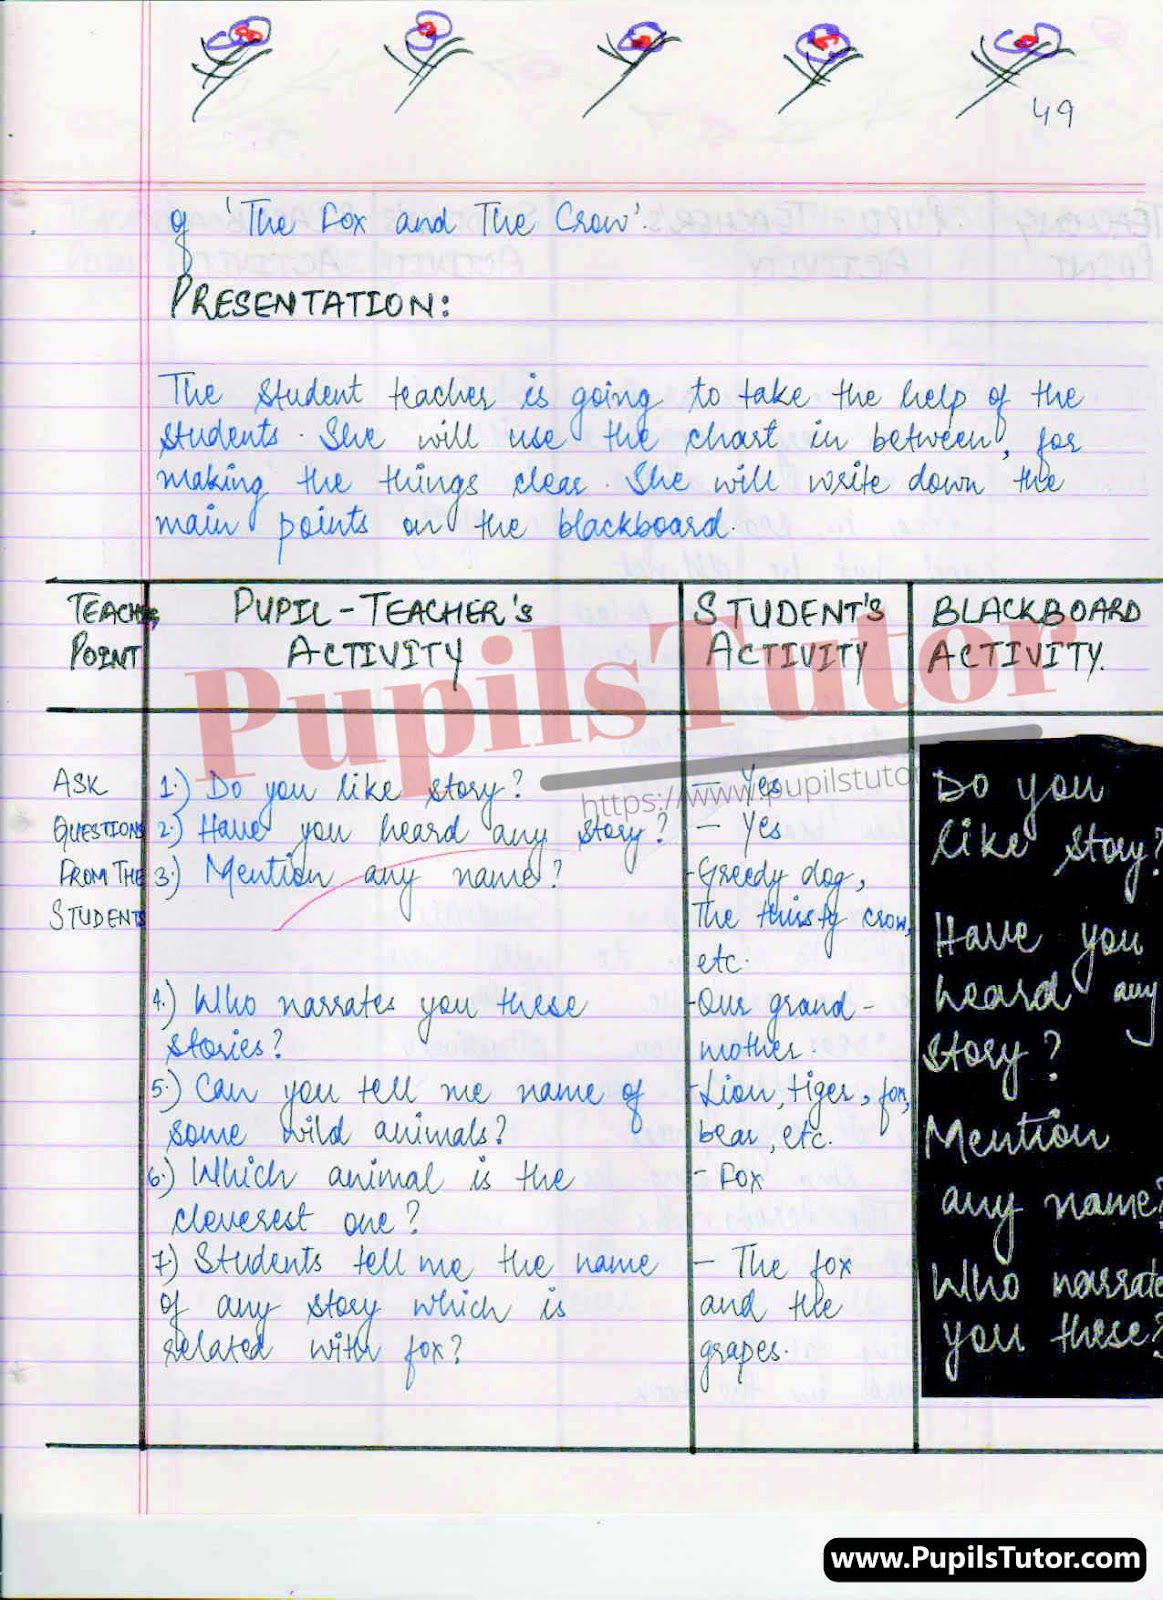 English Lesson Plan On The Fox And The Crow (Story) For Class/Grade 1 To 6 For CBSE NCERT School And College Teachers  – (Page And Image Number 3) – www.pupilstutor.com